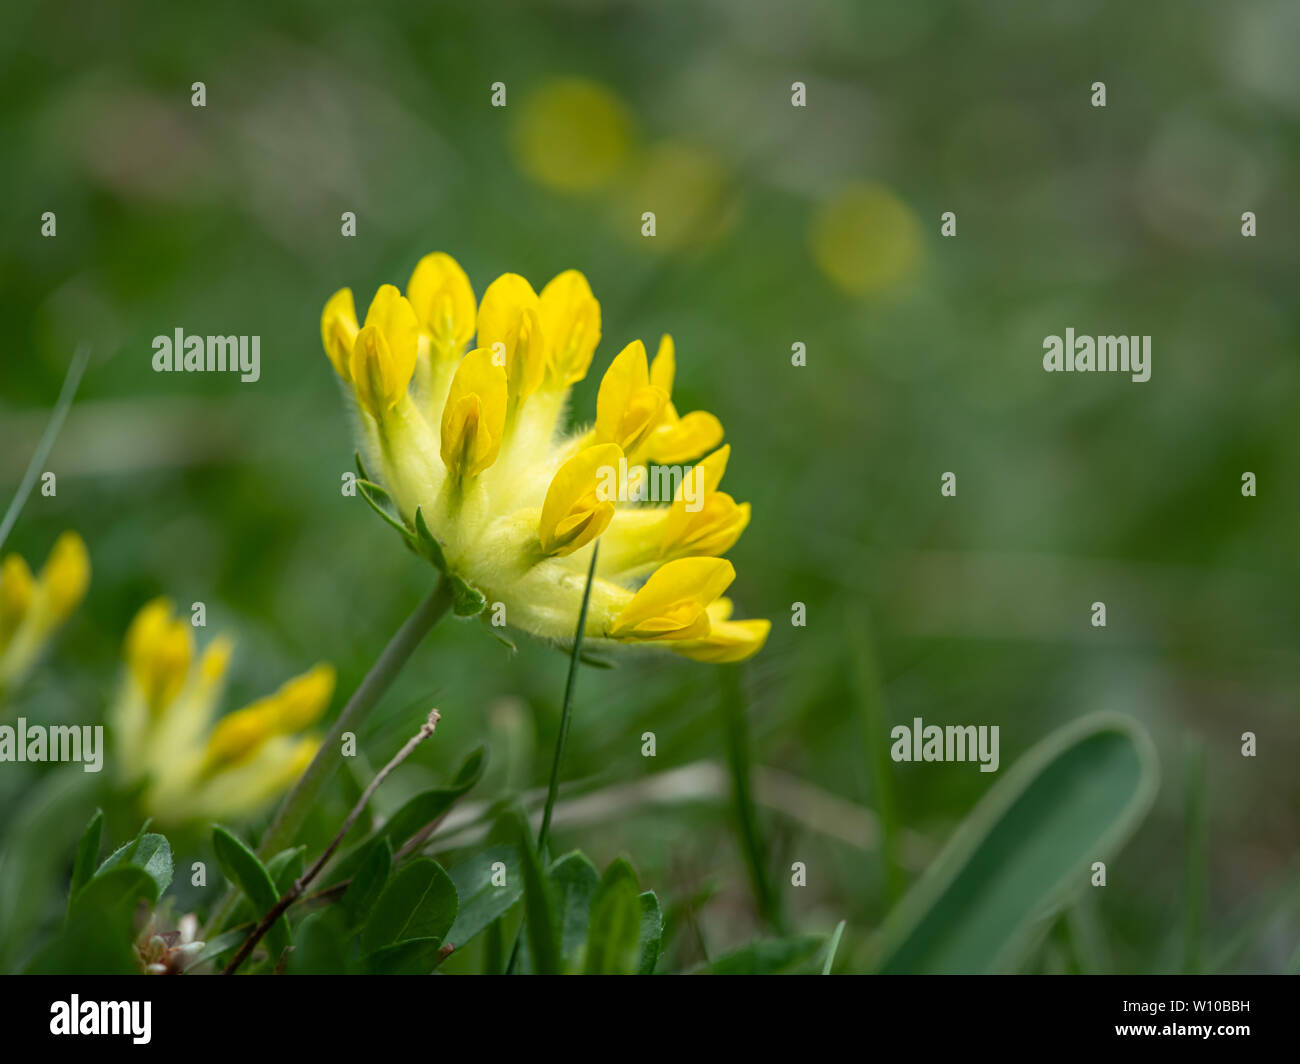 Closeup of the blossoms of a Common kidneyvetch (Anthyllis vulneraria, Fabaceae) in the Austrian Alps Stock Photo